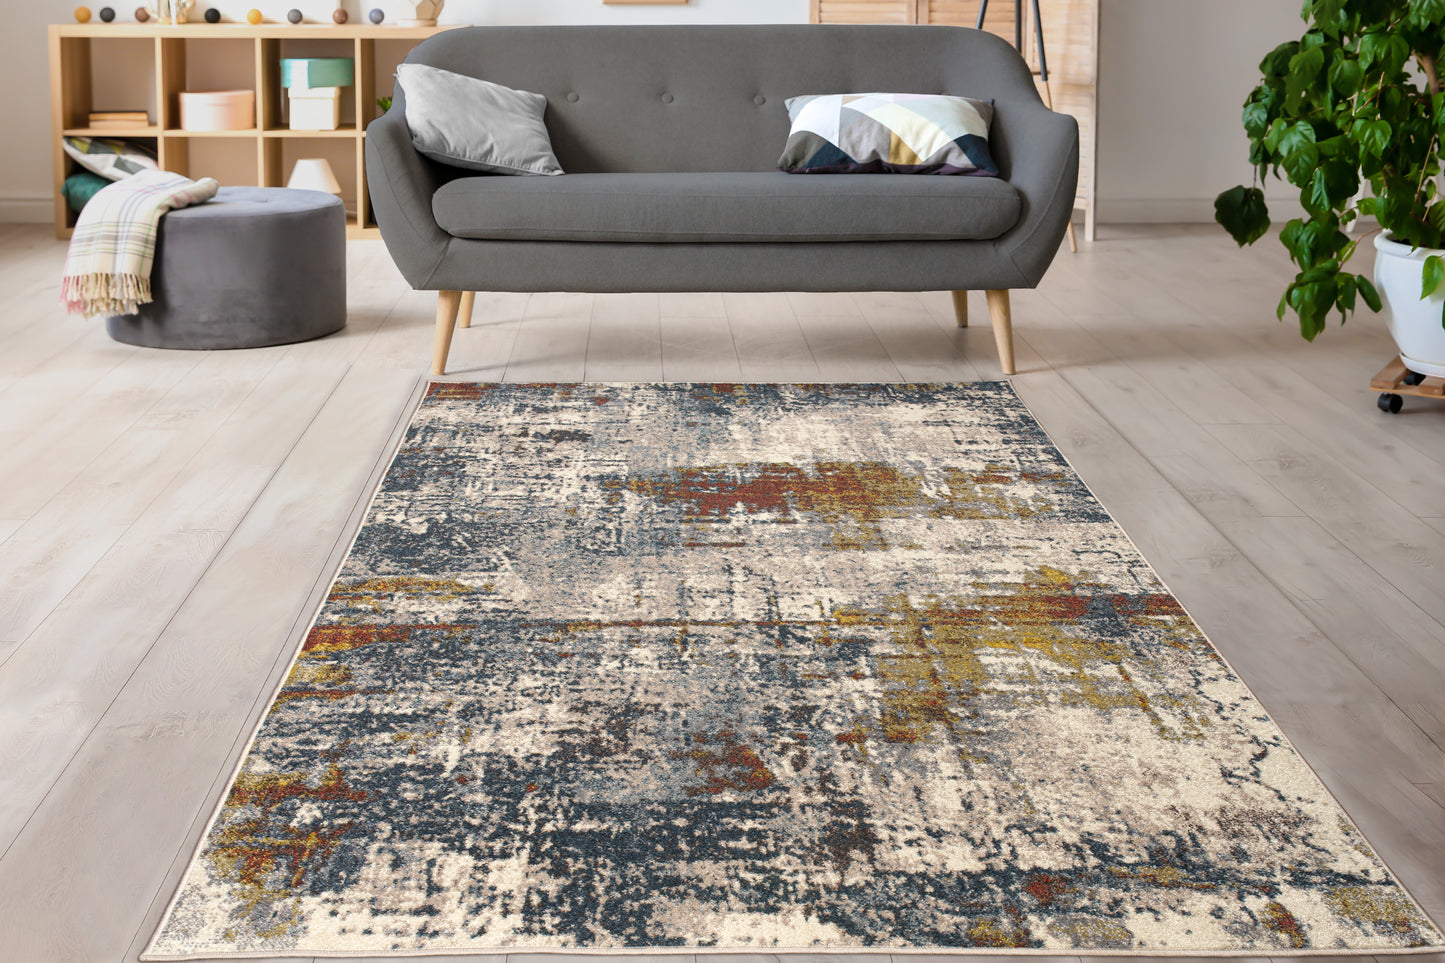 Beige Blue Mustard Brick Red Multicolor Abstract Rustic Area Rug For Living Room Bedroom